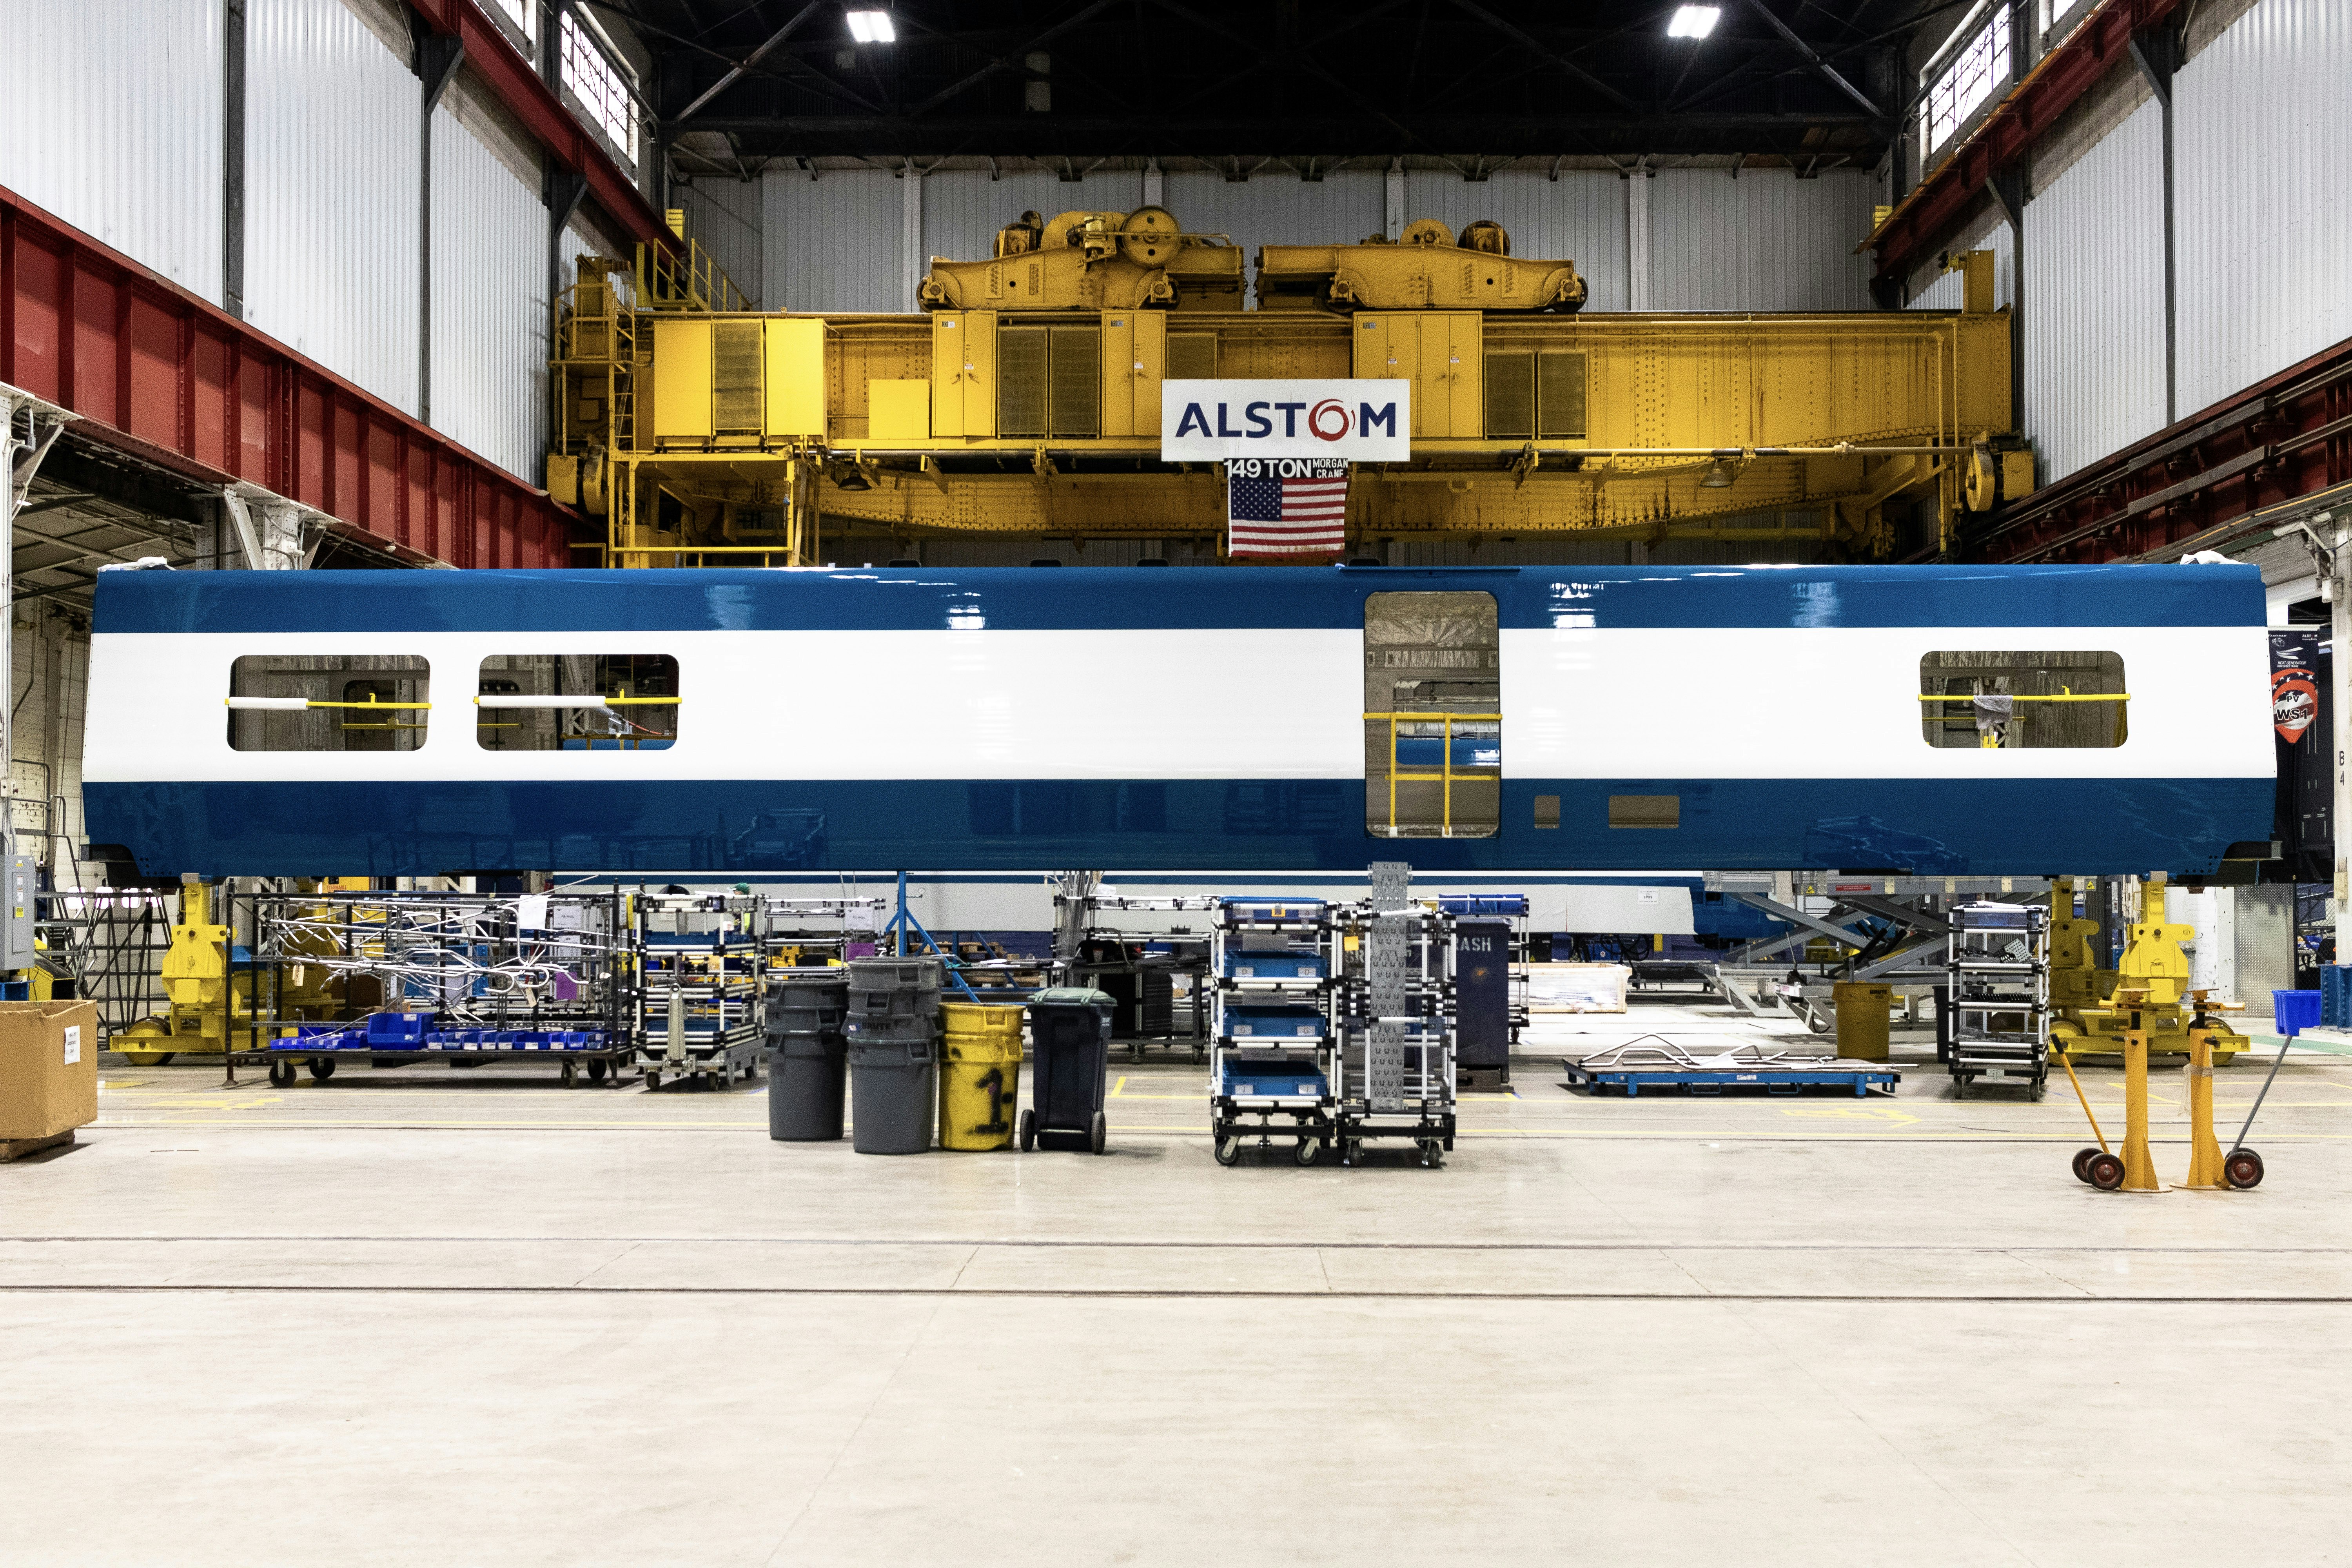 The sleek white and navy striped metal skin of Amtrak's new cafe cars sits on a production line at an Alstom plant, surrounded by bright yellow and red steel industrial equipment, grey and yellow plastic bins, and other manufacturing gear.